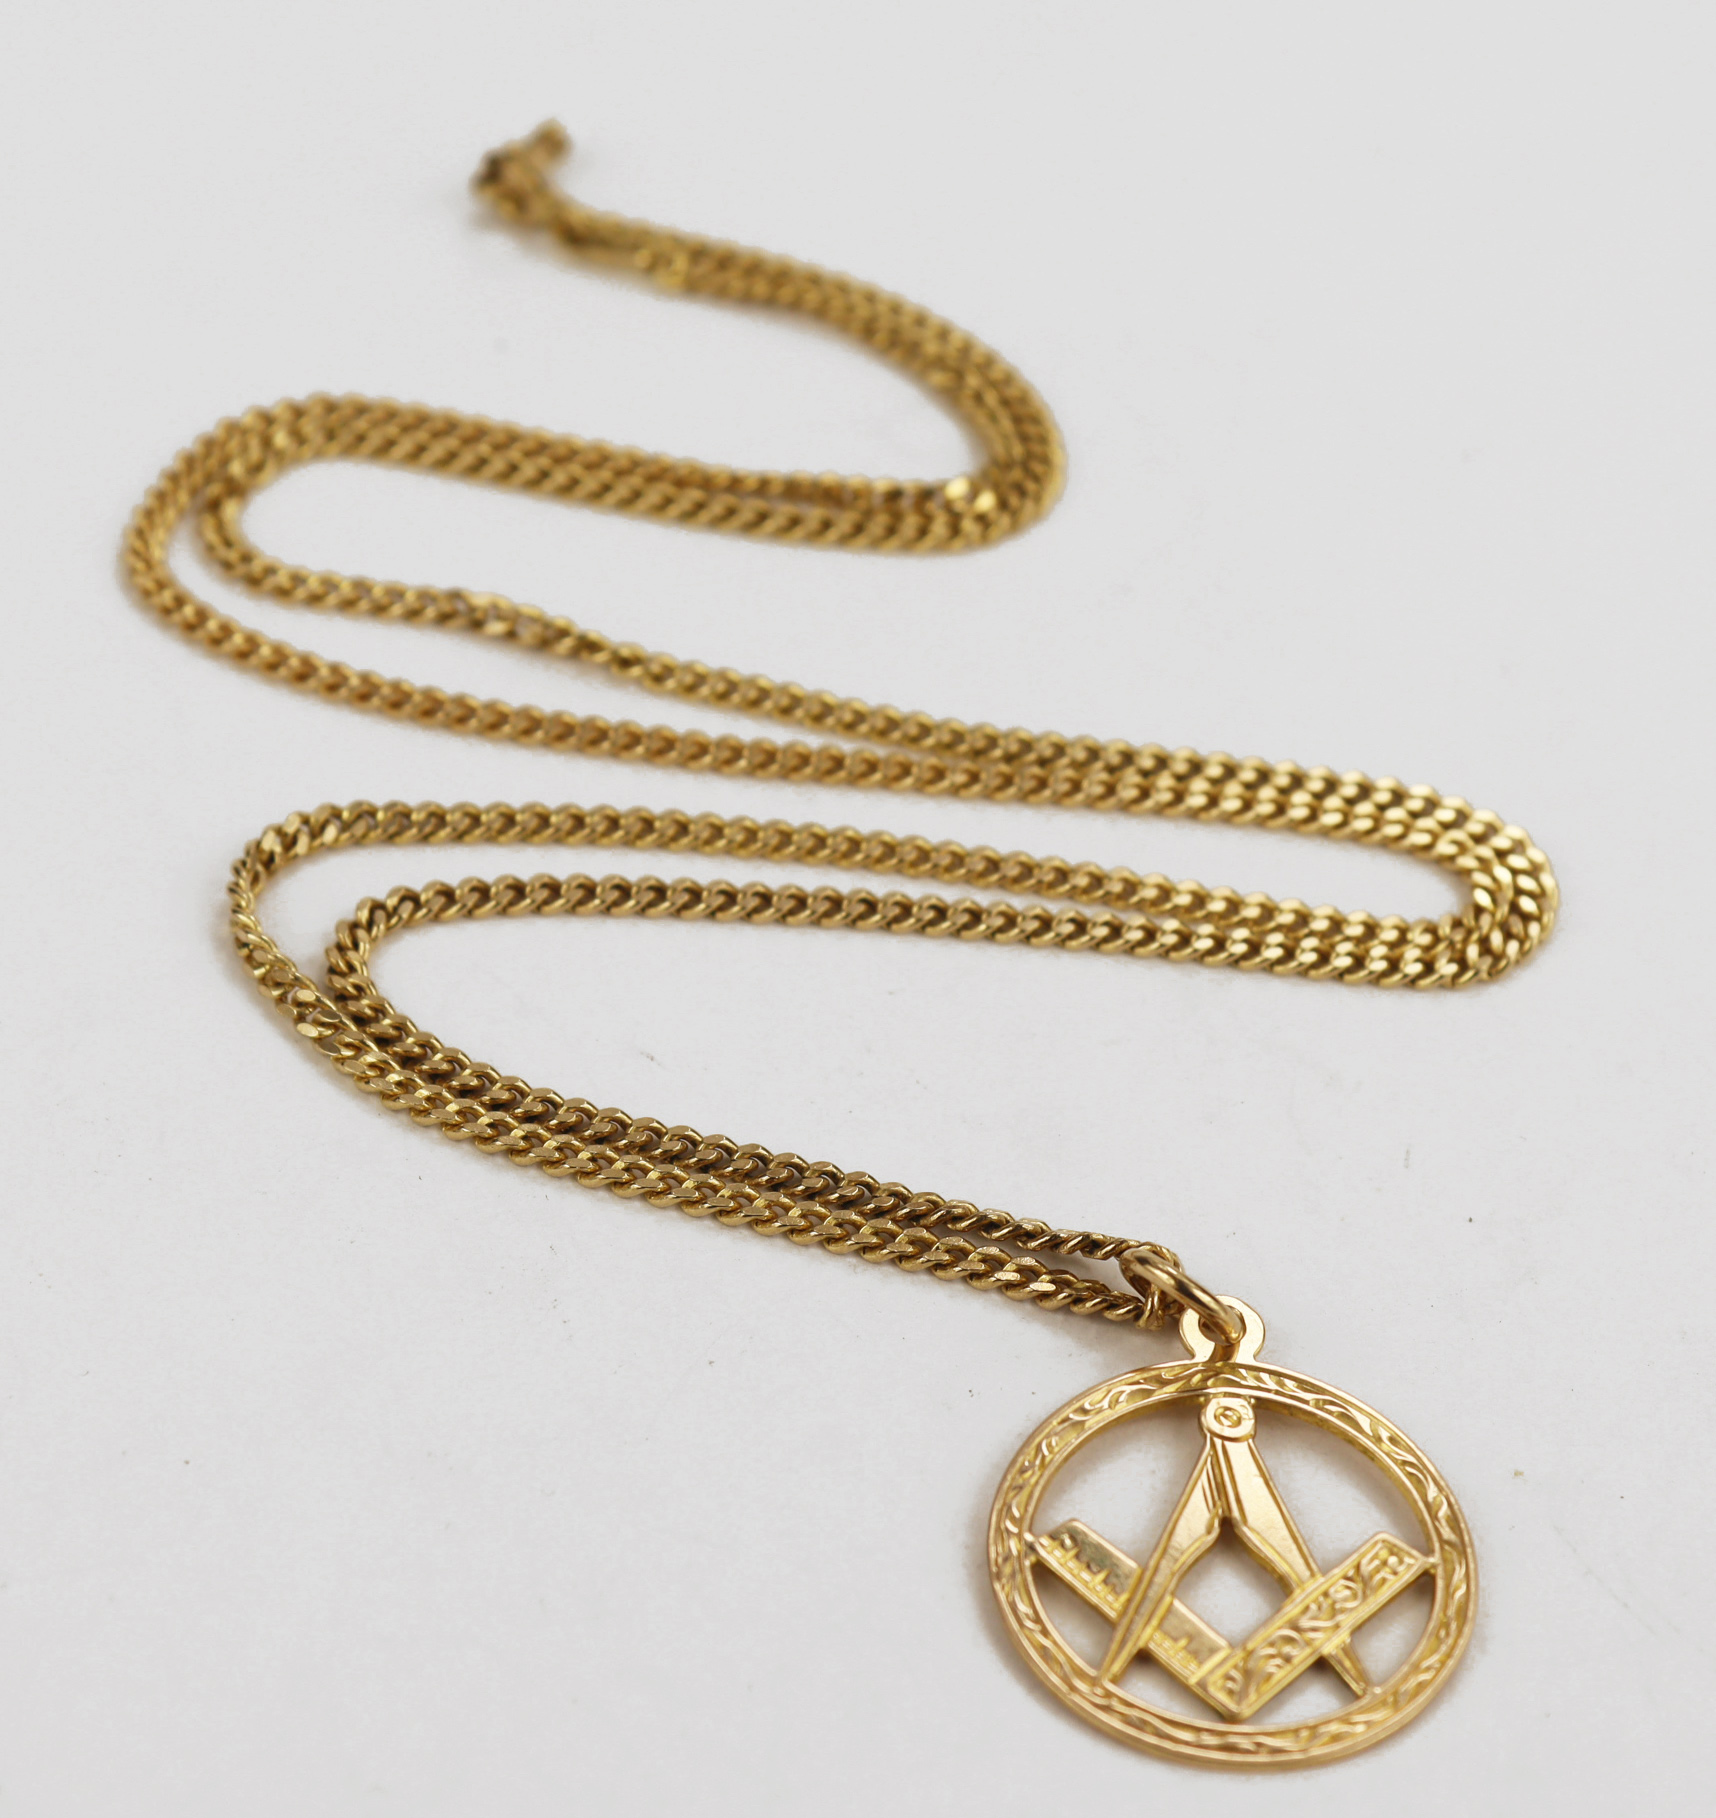 Yellow gold (tests 14ct) Masonic pendant, diameter measures 22mm, weight 2.4g. Suspended from a